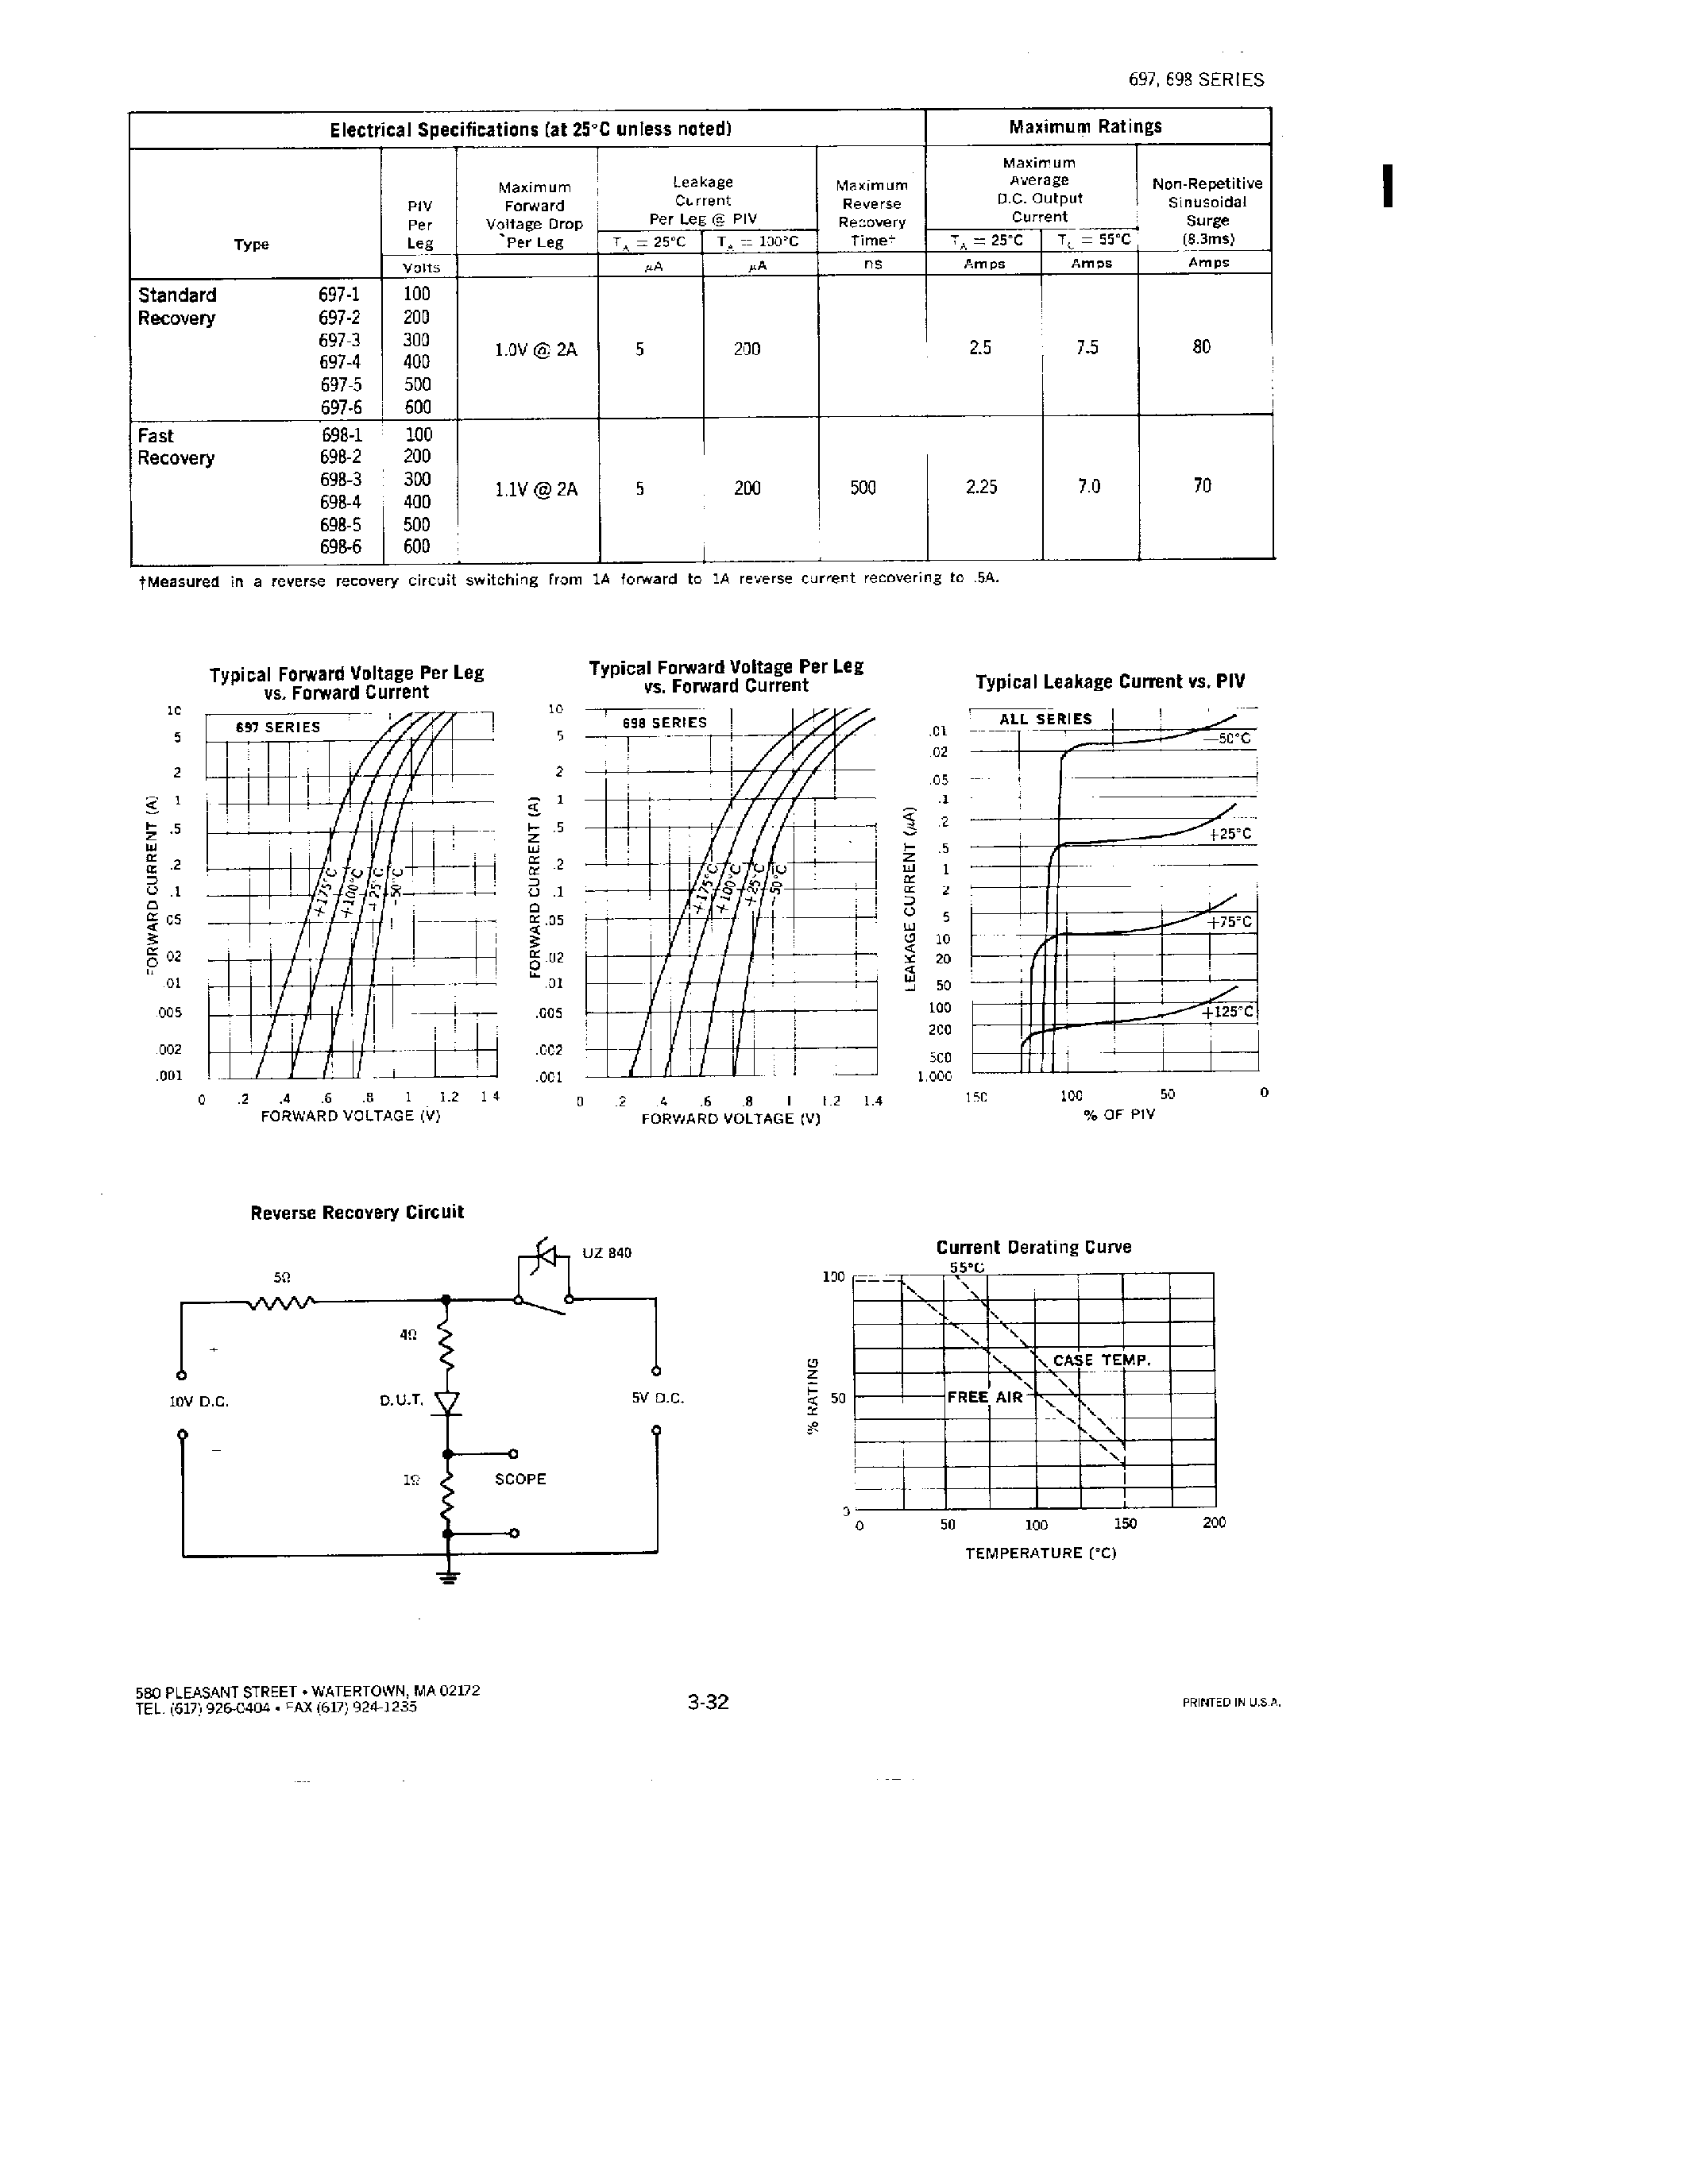 Datasheet 697-5 - RECTIFIERS ASSEMBLIES SINGLE PHASE BRIDGES/ 7.5 AMP/ STANDARD AND FAST RECOVERY page 2